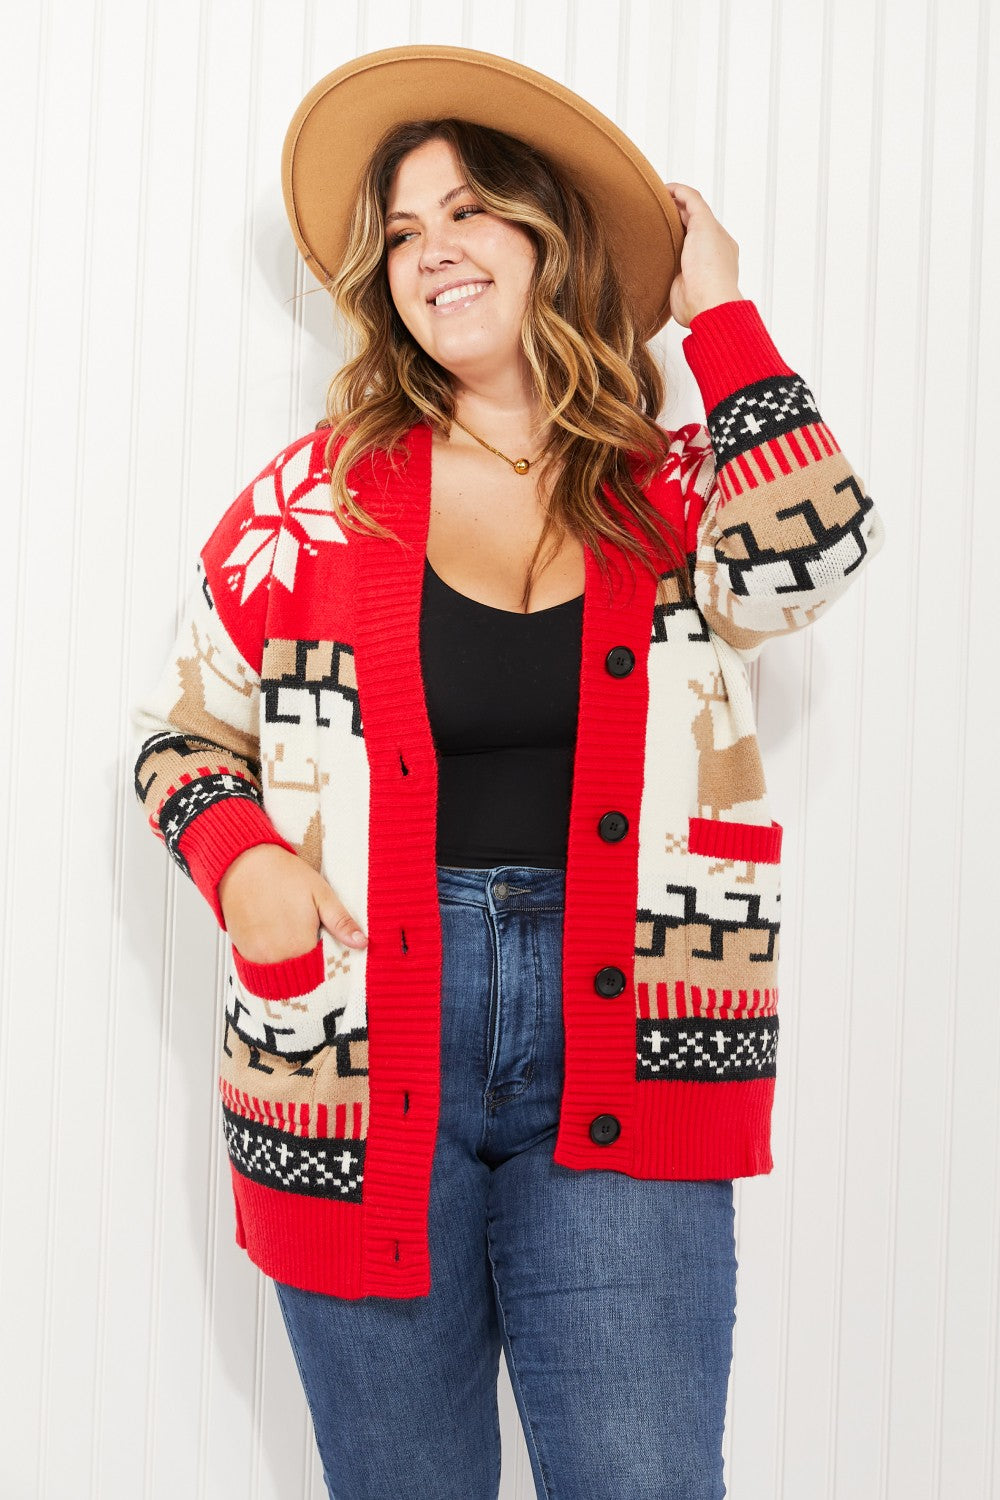 Heimish Holiday Cheers Full Size Christmas Print Cardigan - OW *FINAL SALE*